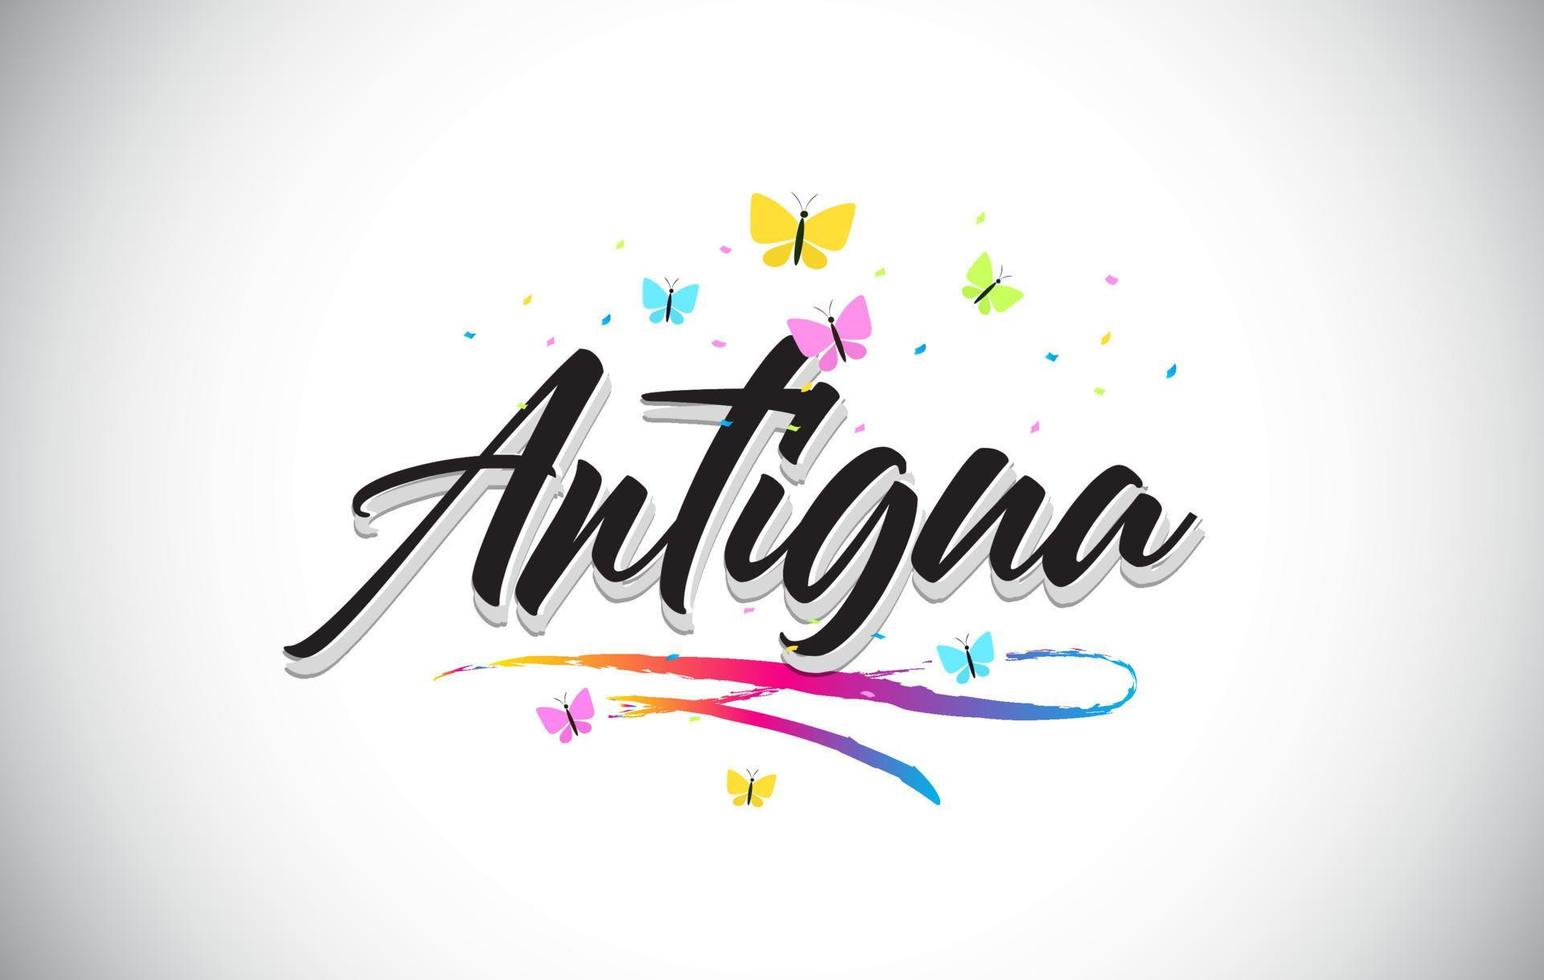 Antigua Handwritten Vector Word Text with Butterflies and Colorful Swoosh.